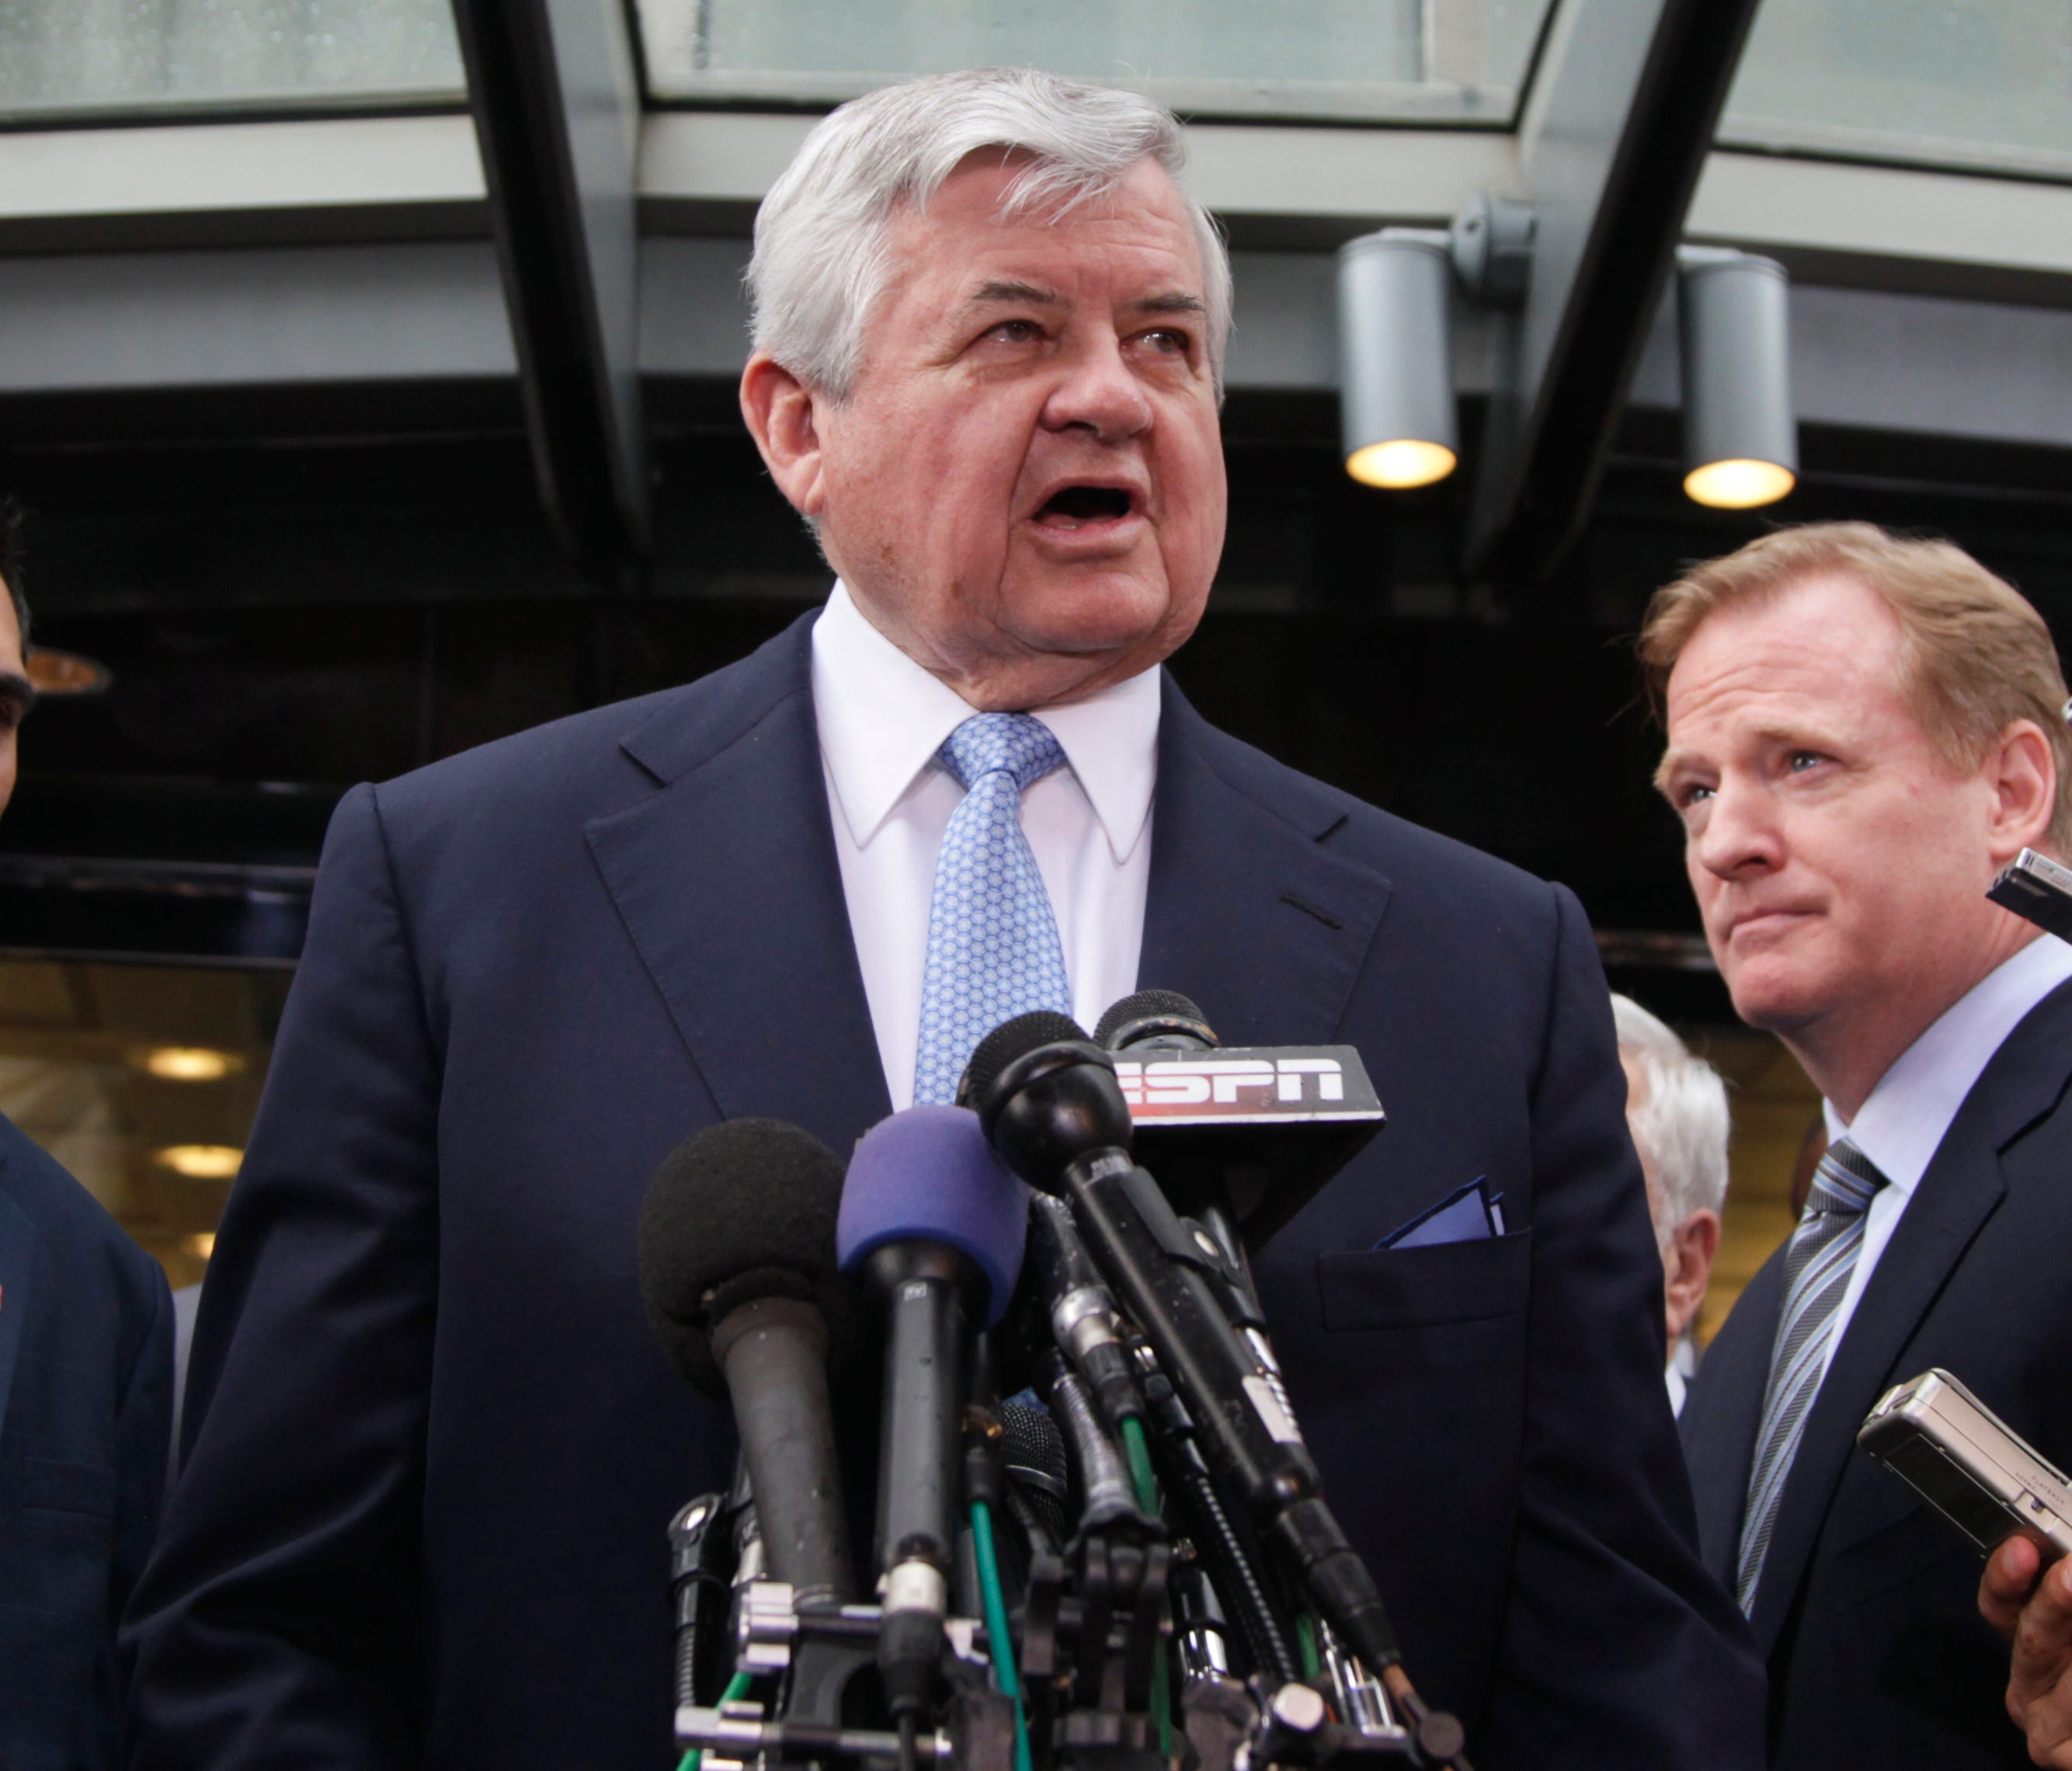 Carolina Panthers owner Jerry Richardson Carolina Panthers, center flanked by NFL football Commissioner Roger Goodell, right, and NFLPA President Kevin Mawae, speaks during a news conference at the NFL Players Association in Washington, Monday, July 